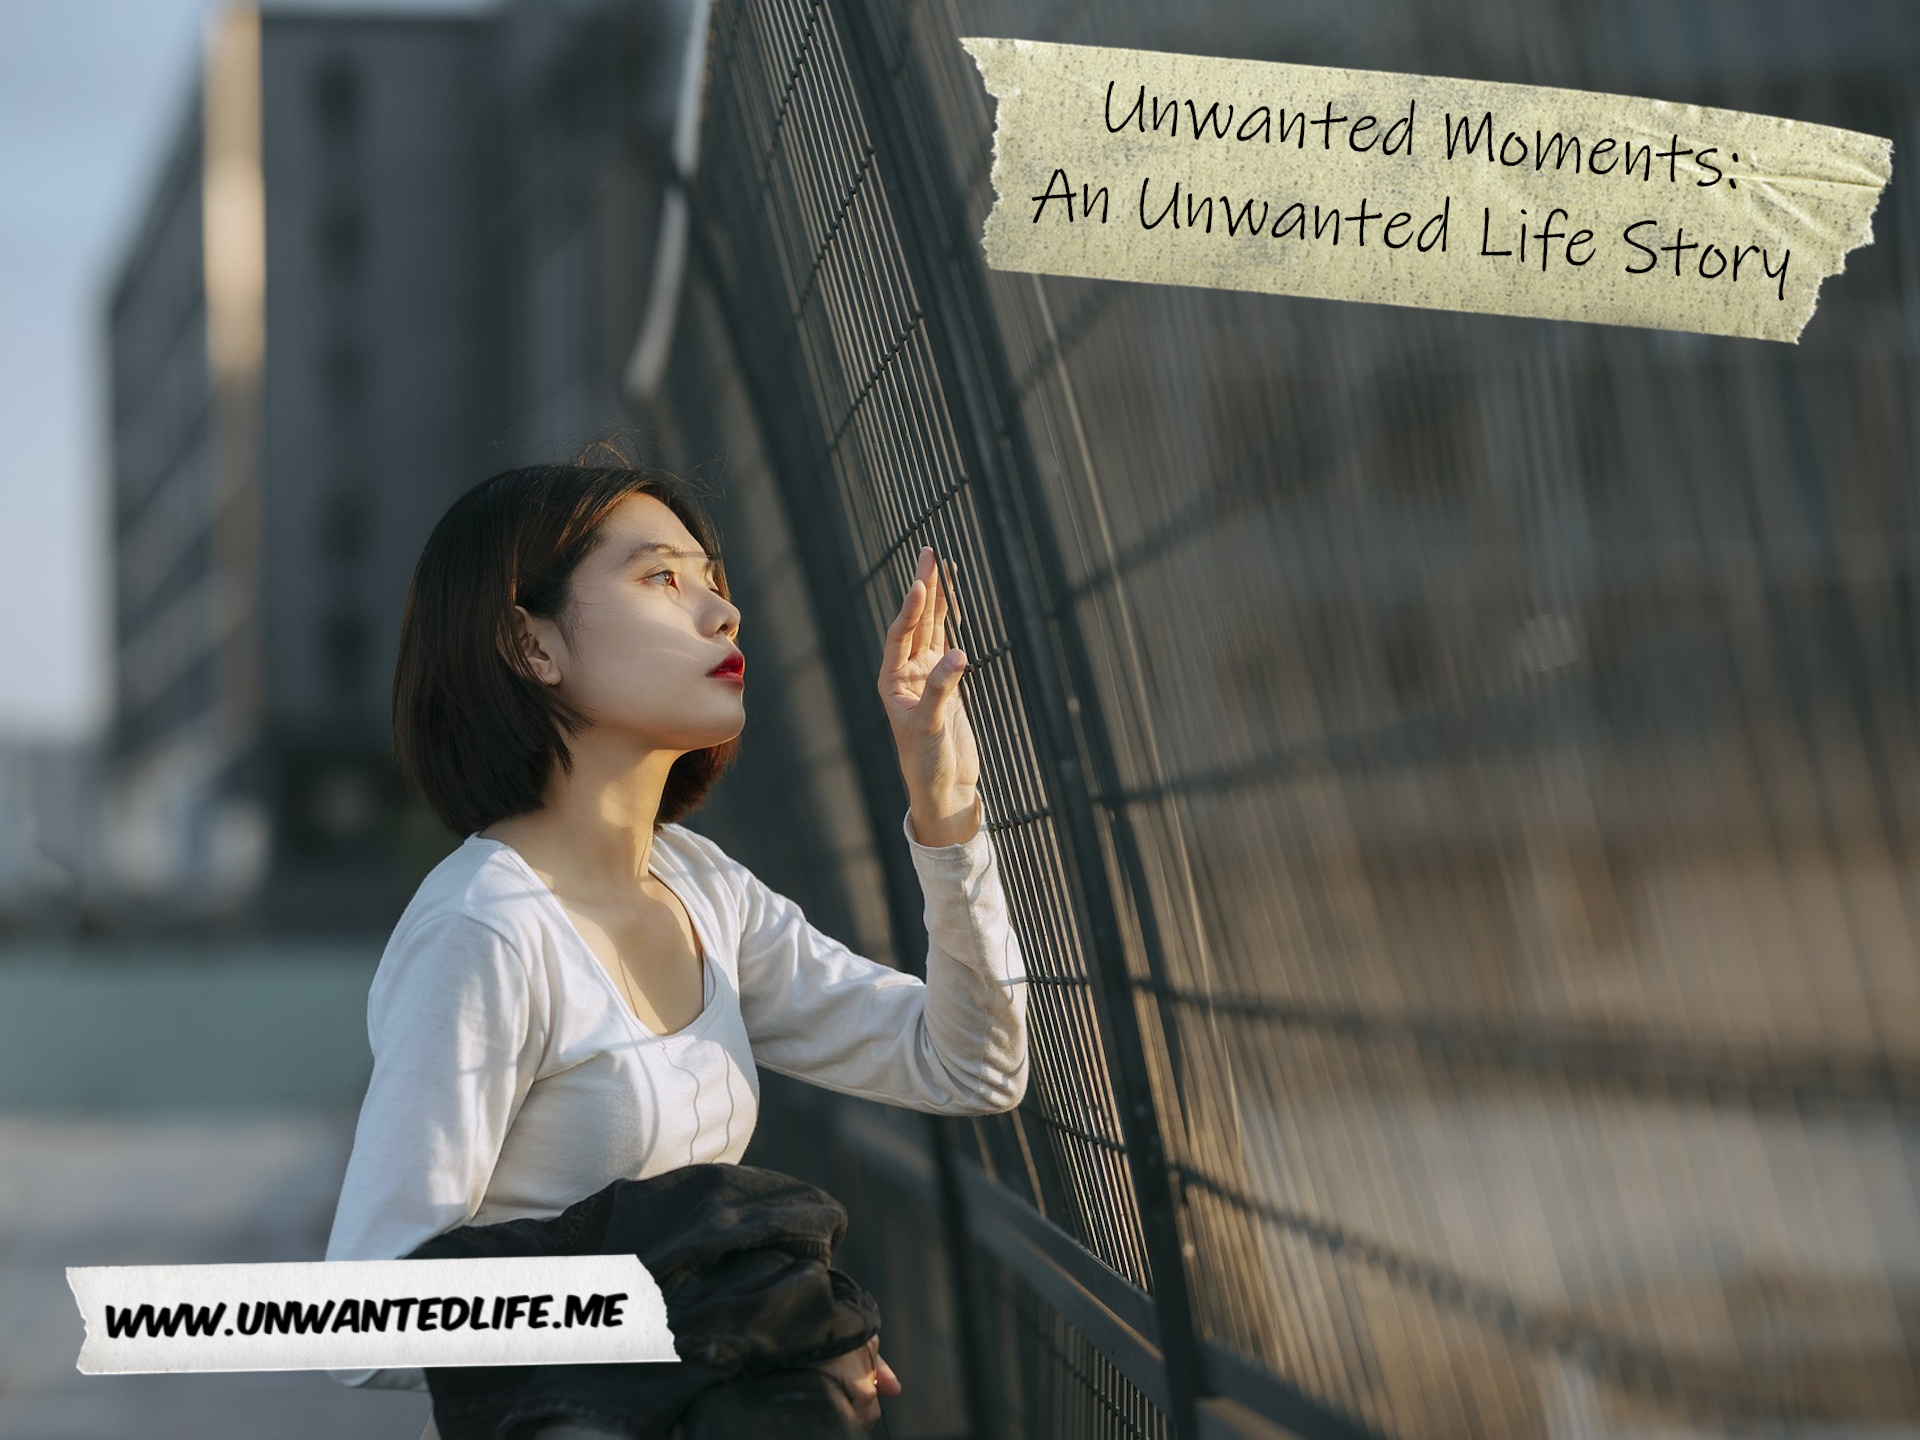 A photo of a lone East Asian woman looking through a chain-link fence to represent the topic of the article - Unwanted Moments: An Unwanted Life Story